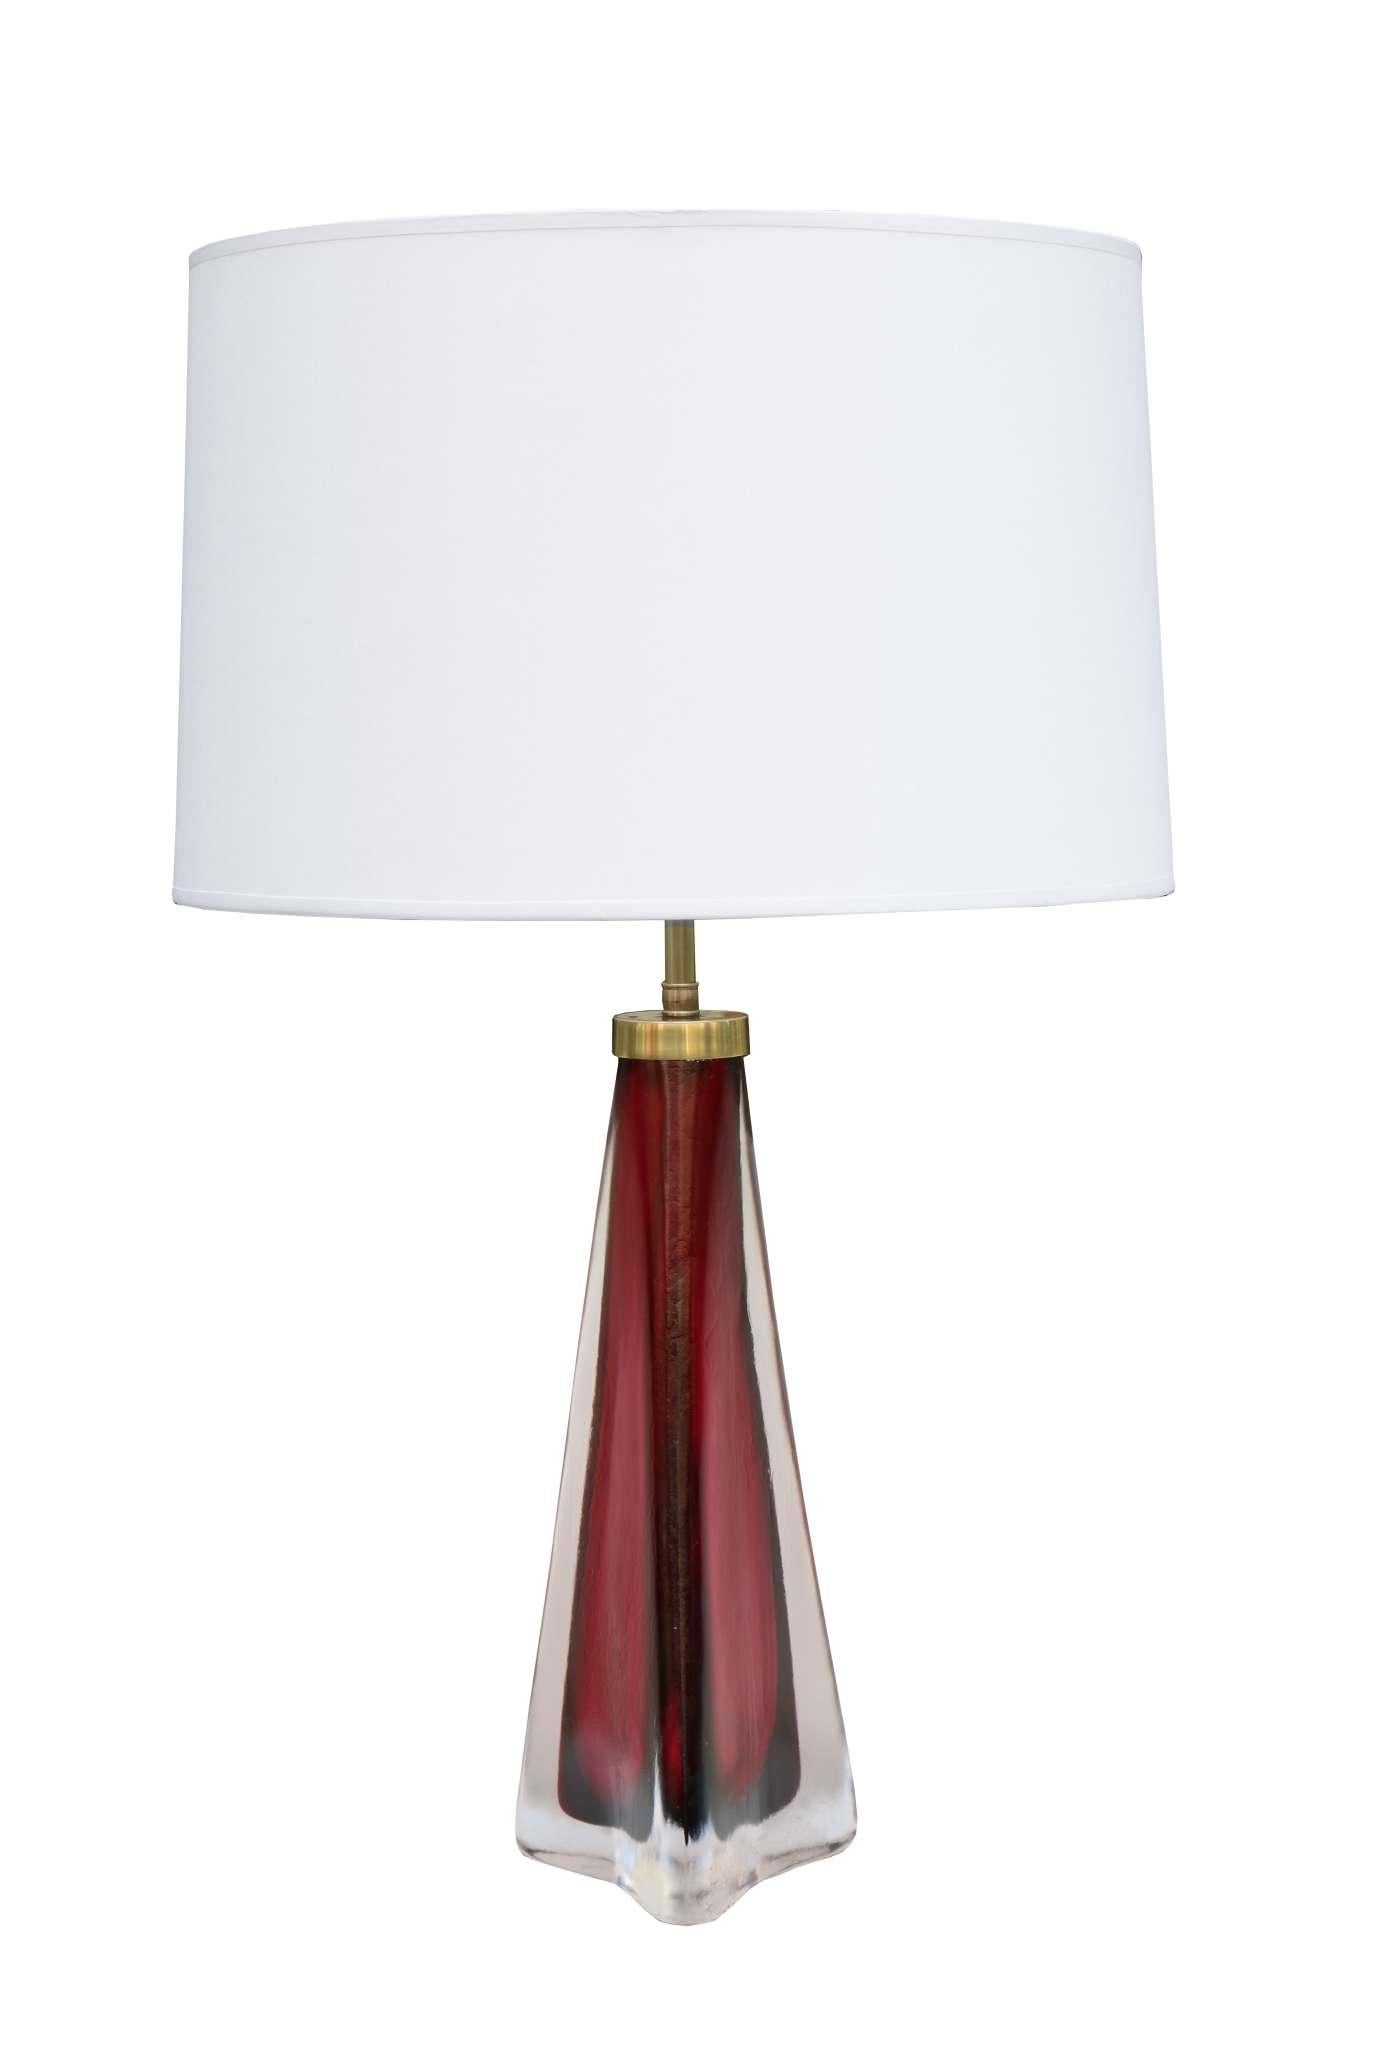 A pair of Orrefors Modernist art glass table lamps. 
Red textured glass in a pyramid shape with patinated brass fittings and details.
With Orrefors signature and label.